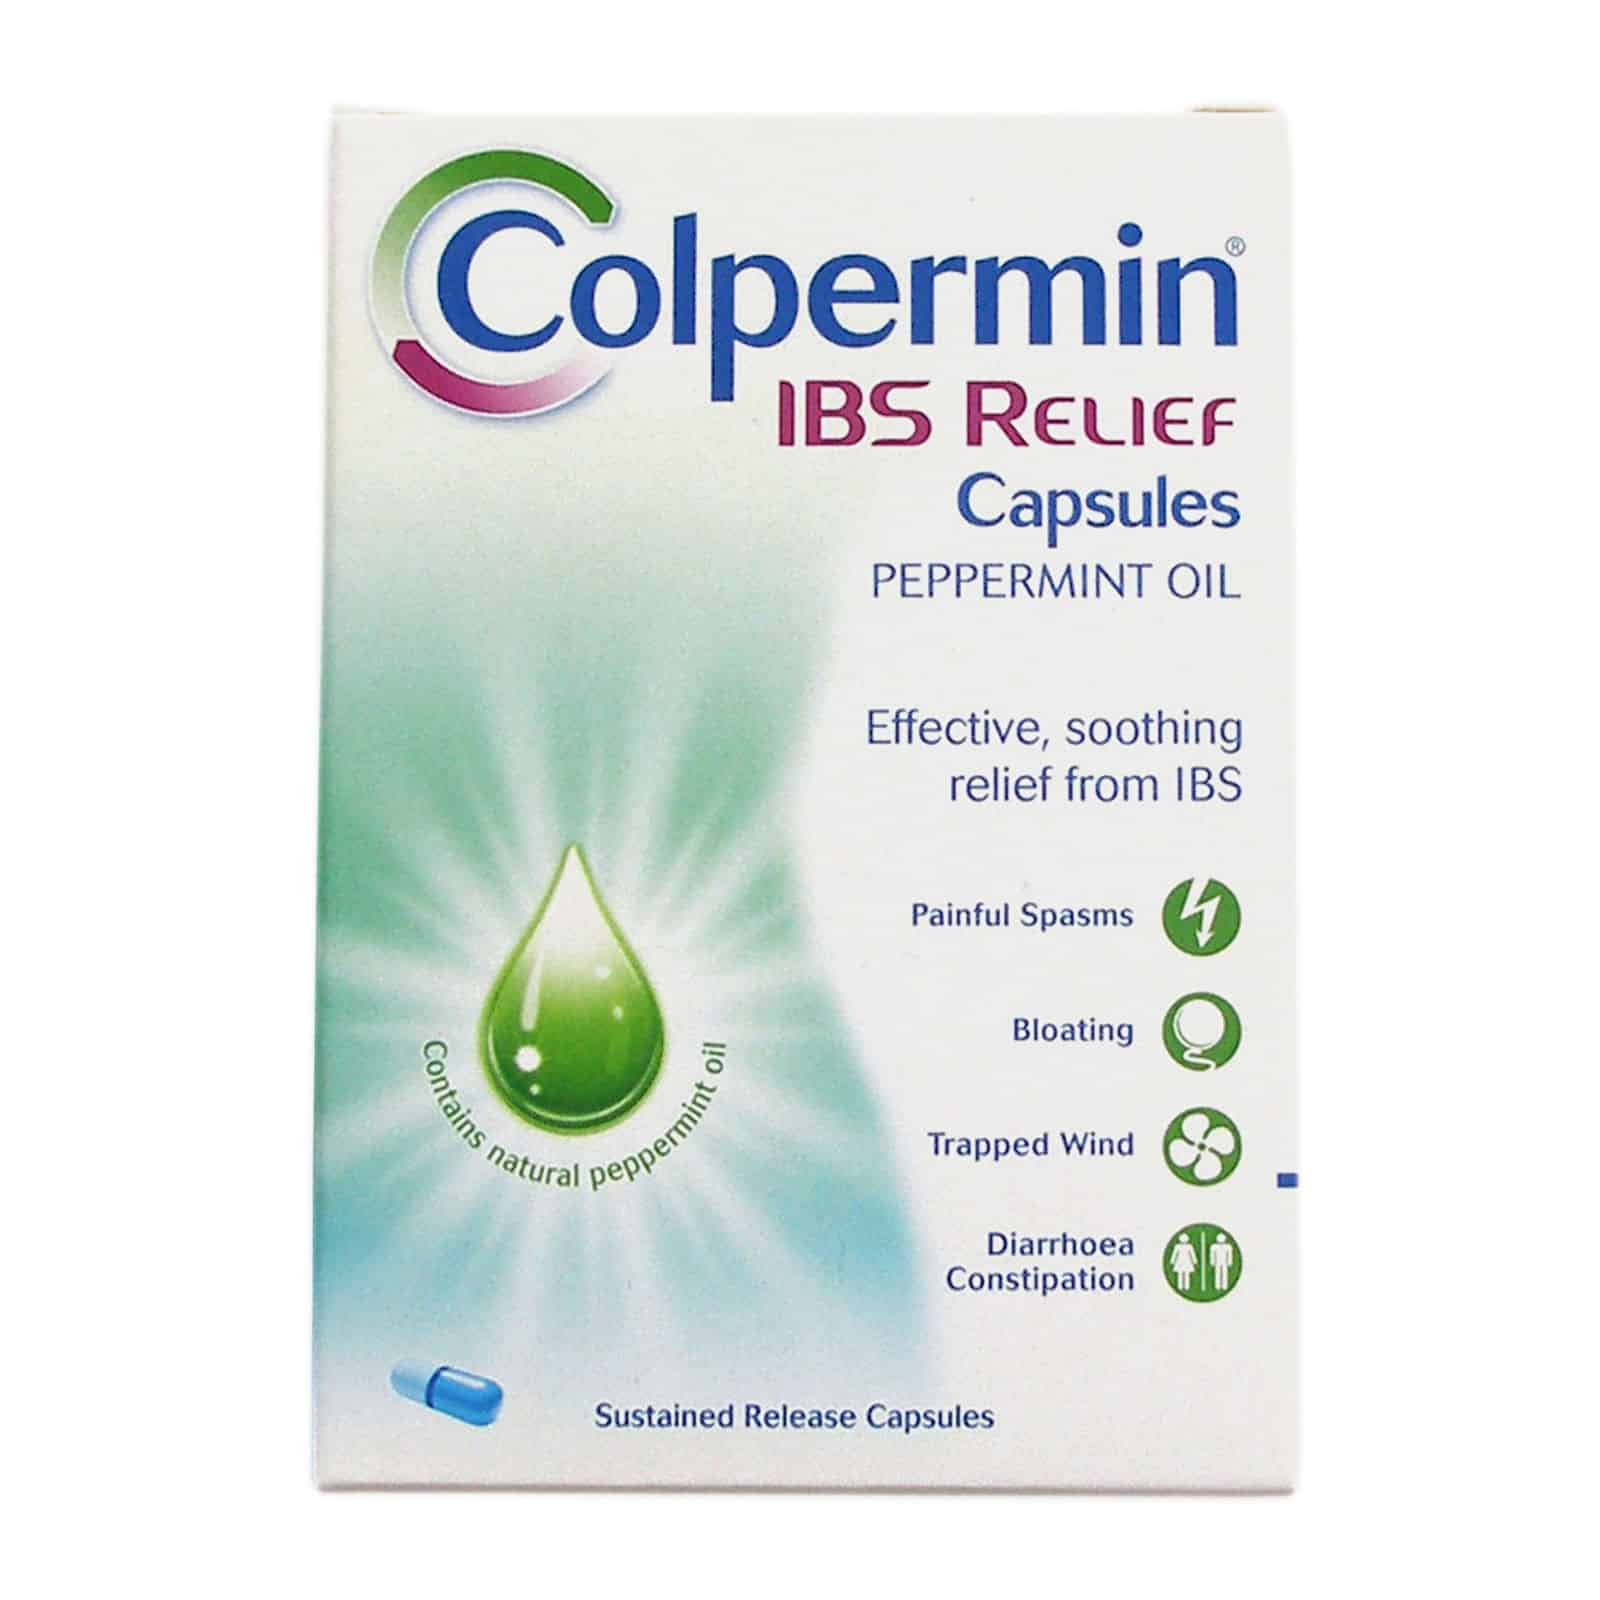 Colpermin IBS Relief Peppermint Oil Capsules